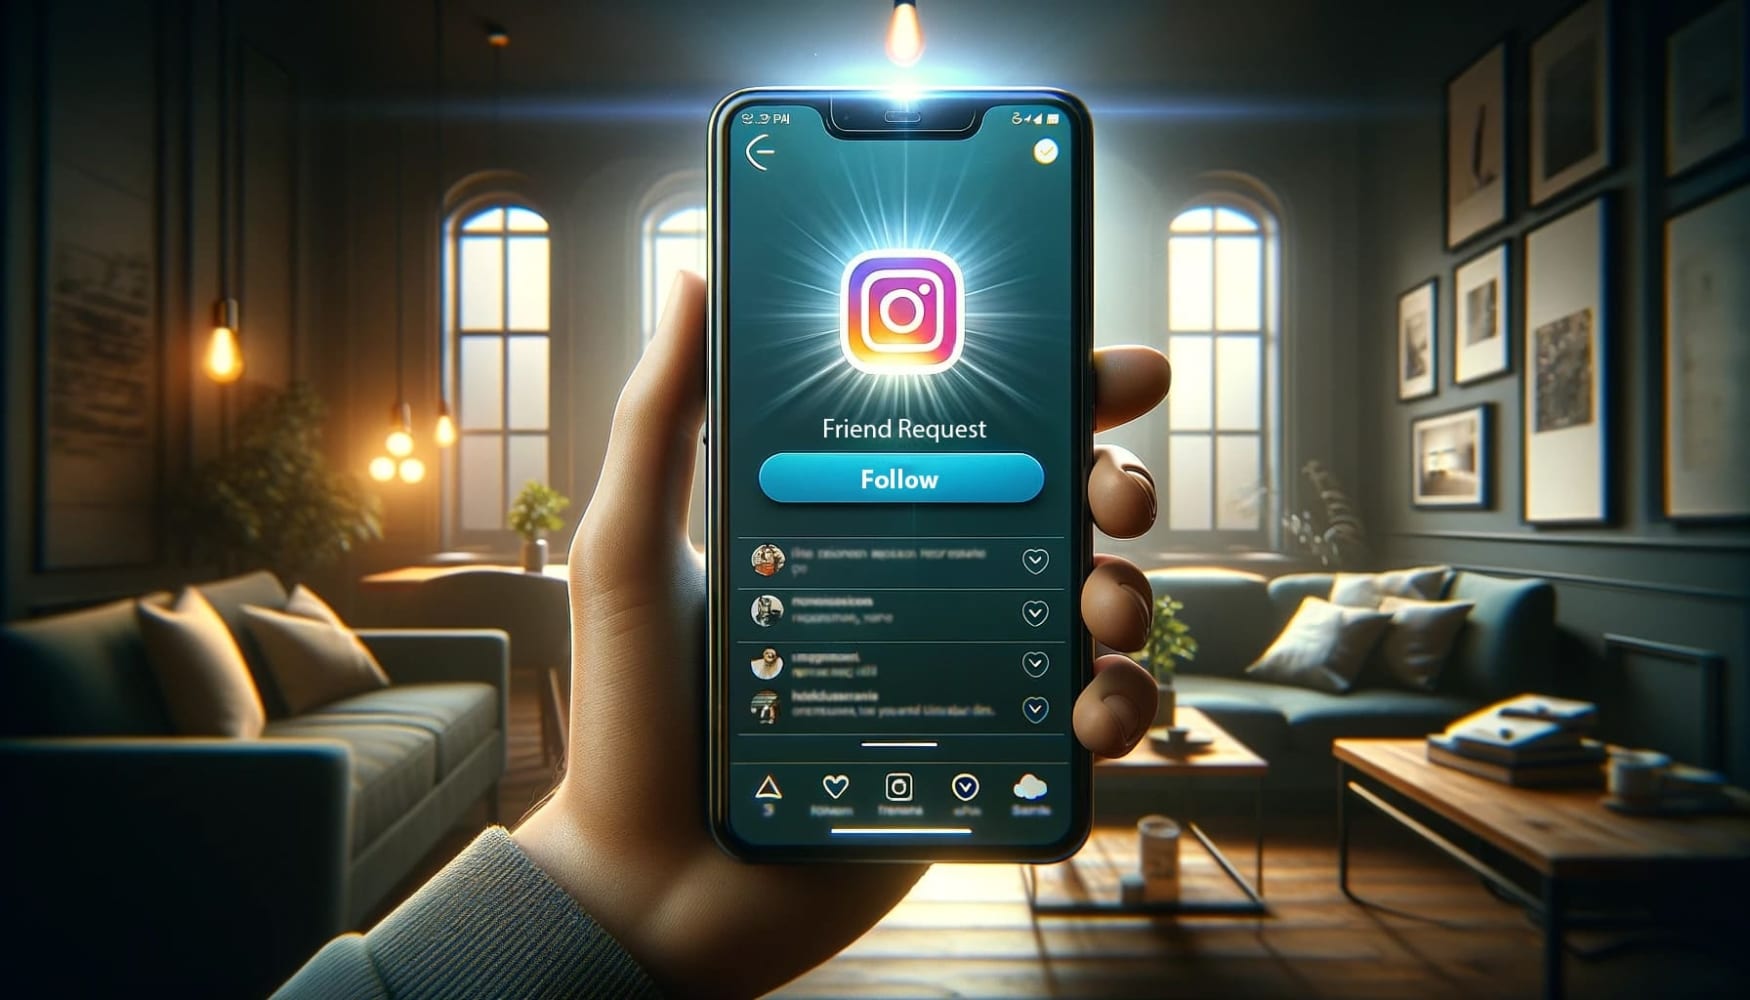 The illustration depicting a hand holding a smartphone with the Instagram interface on the screen. The screen display a friend request notification with a clear, vibrant 'Follow' button.